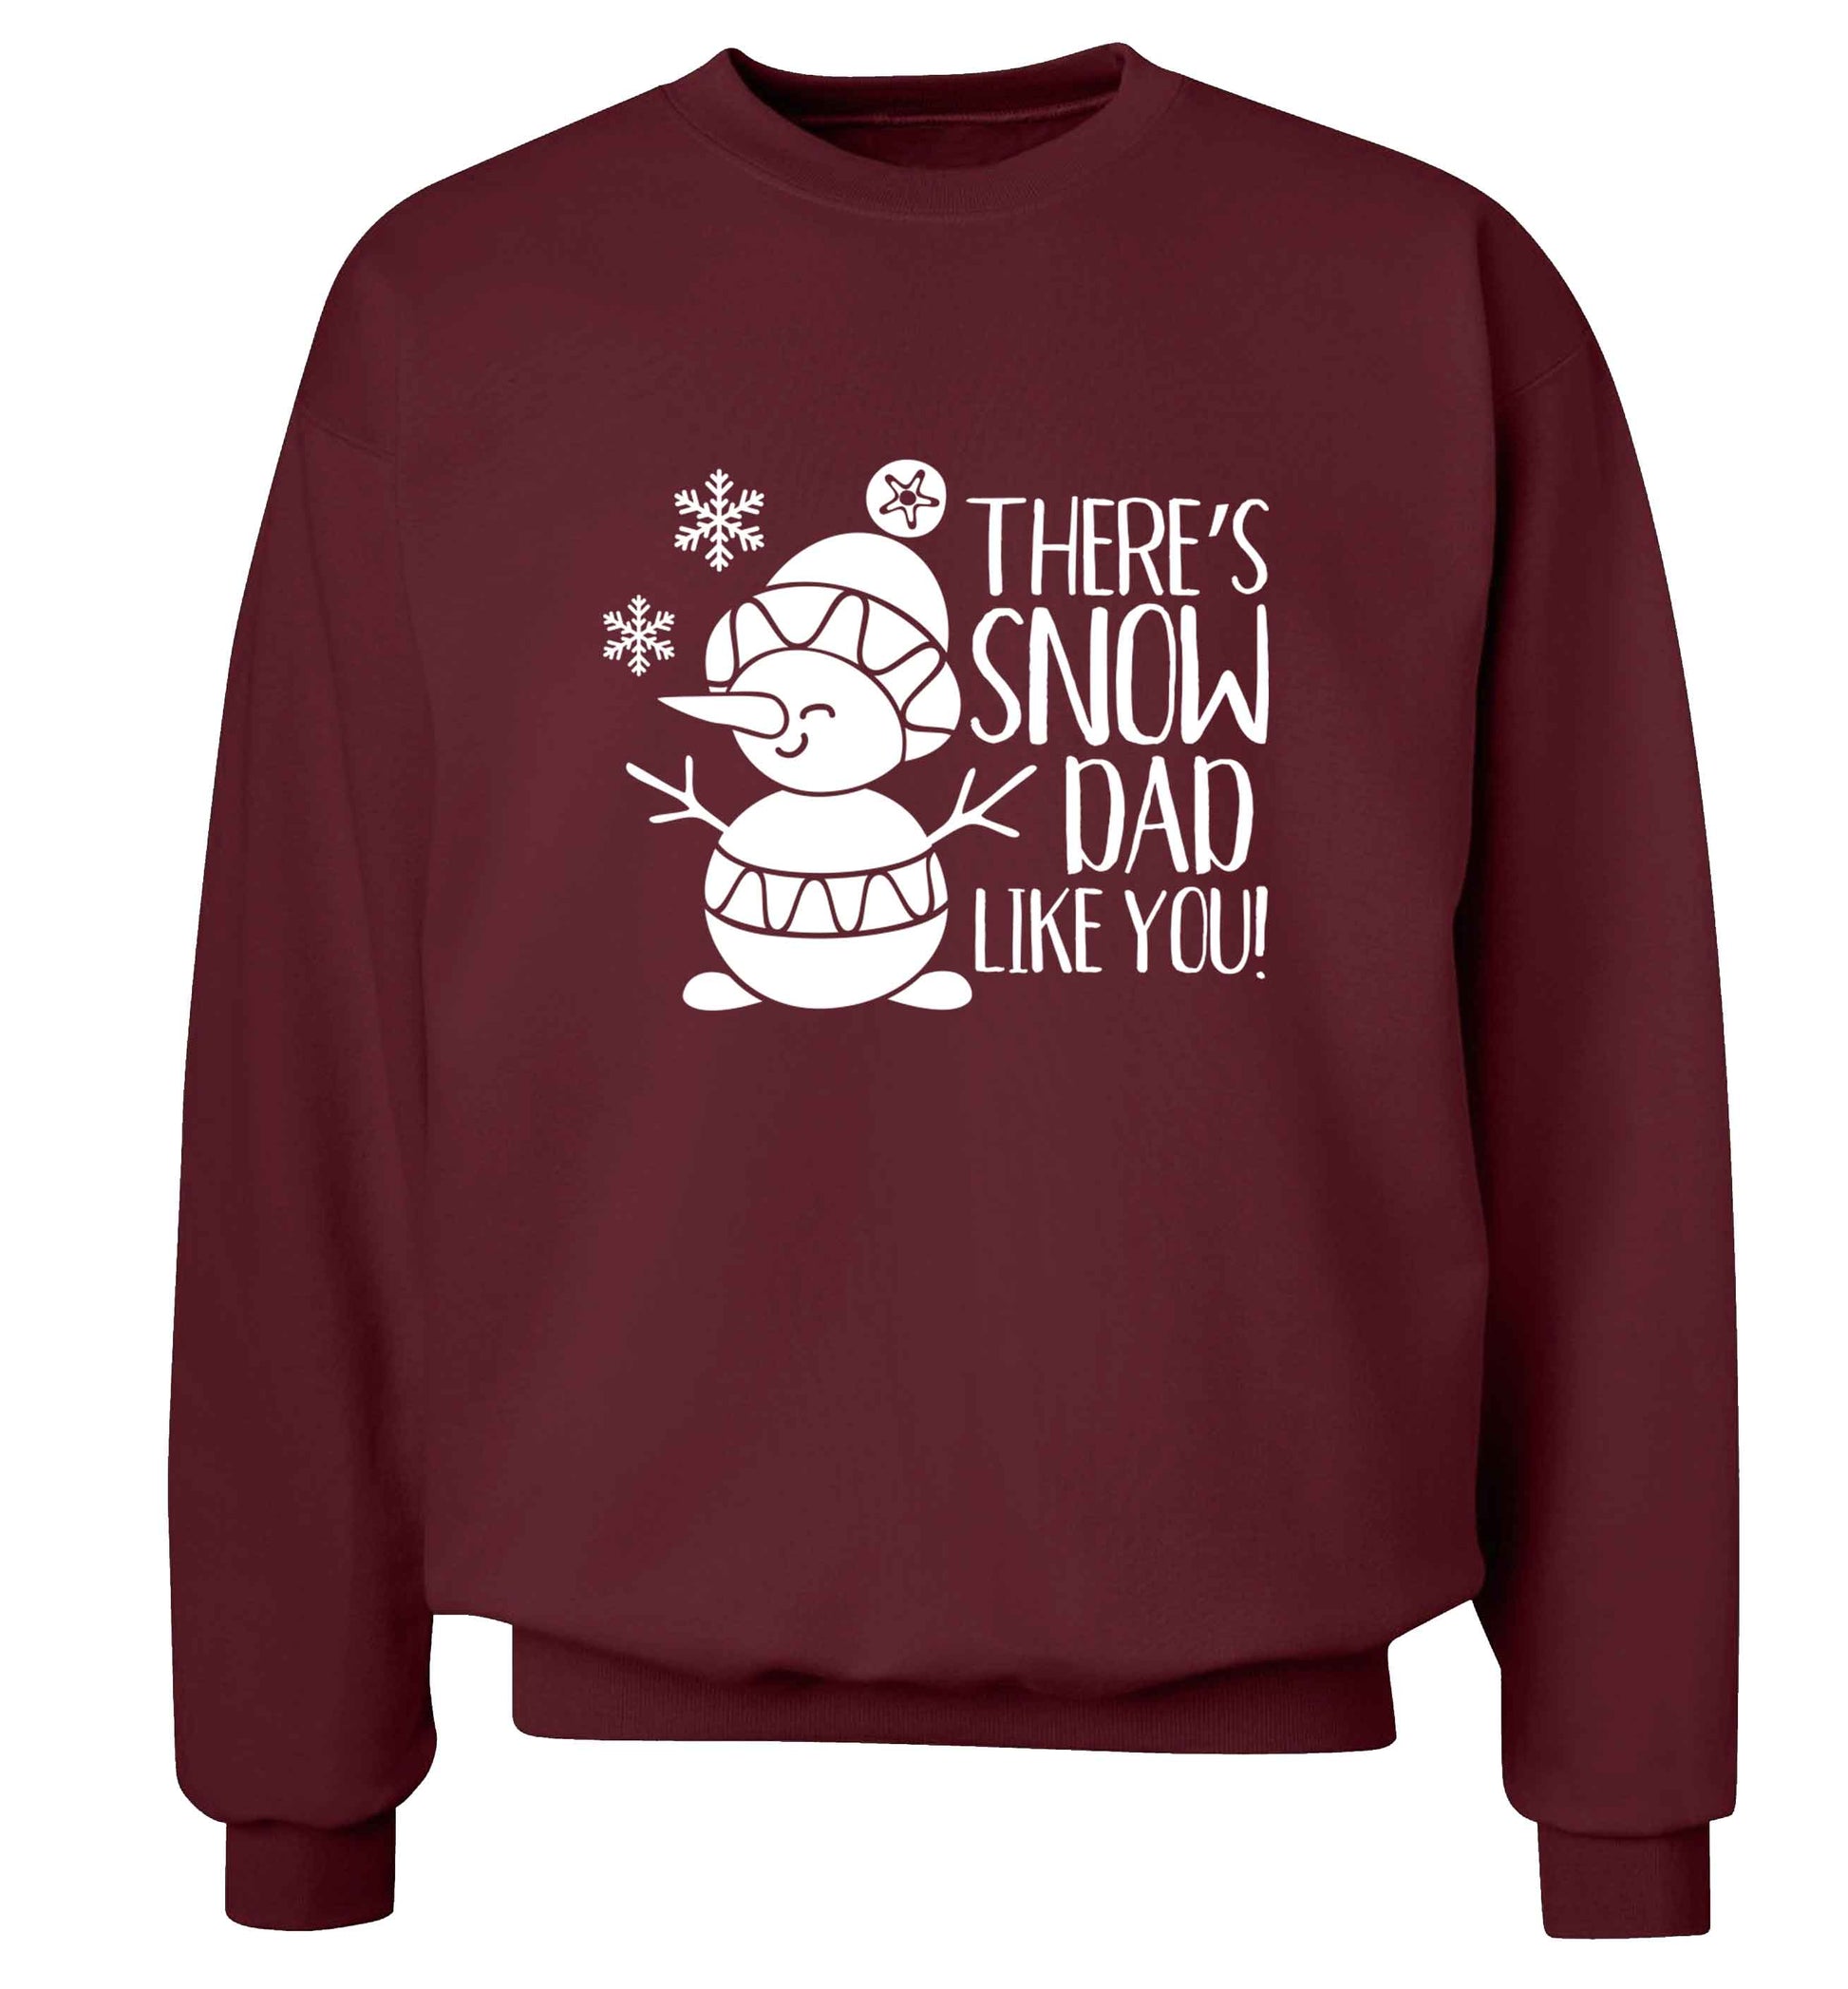 There's snow dad like you adult's unisex maroon sweater 2XL